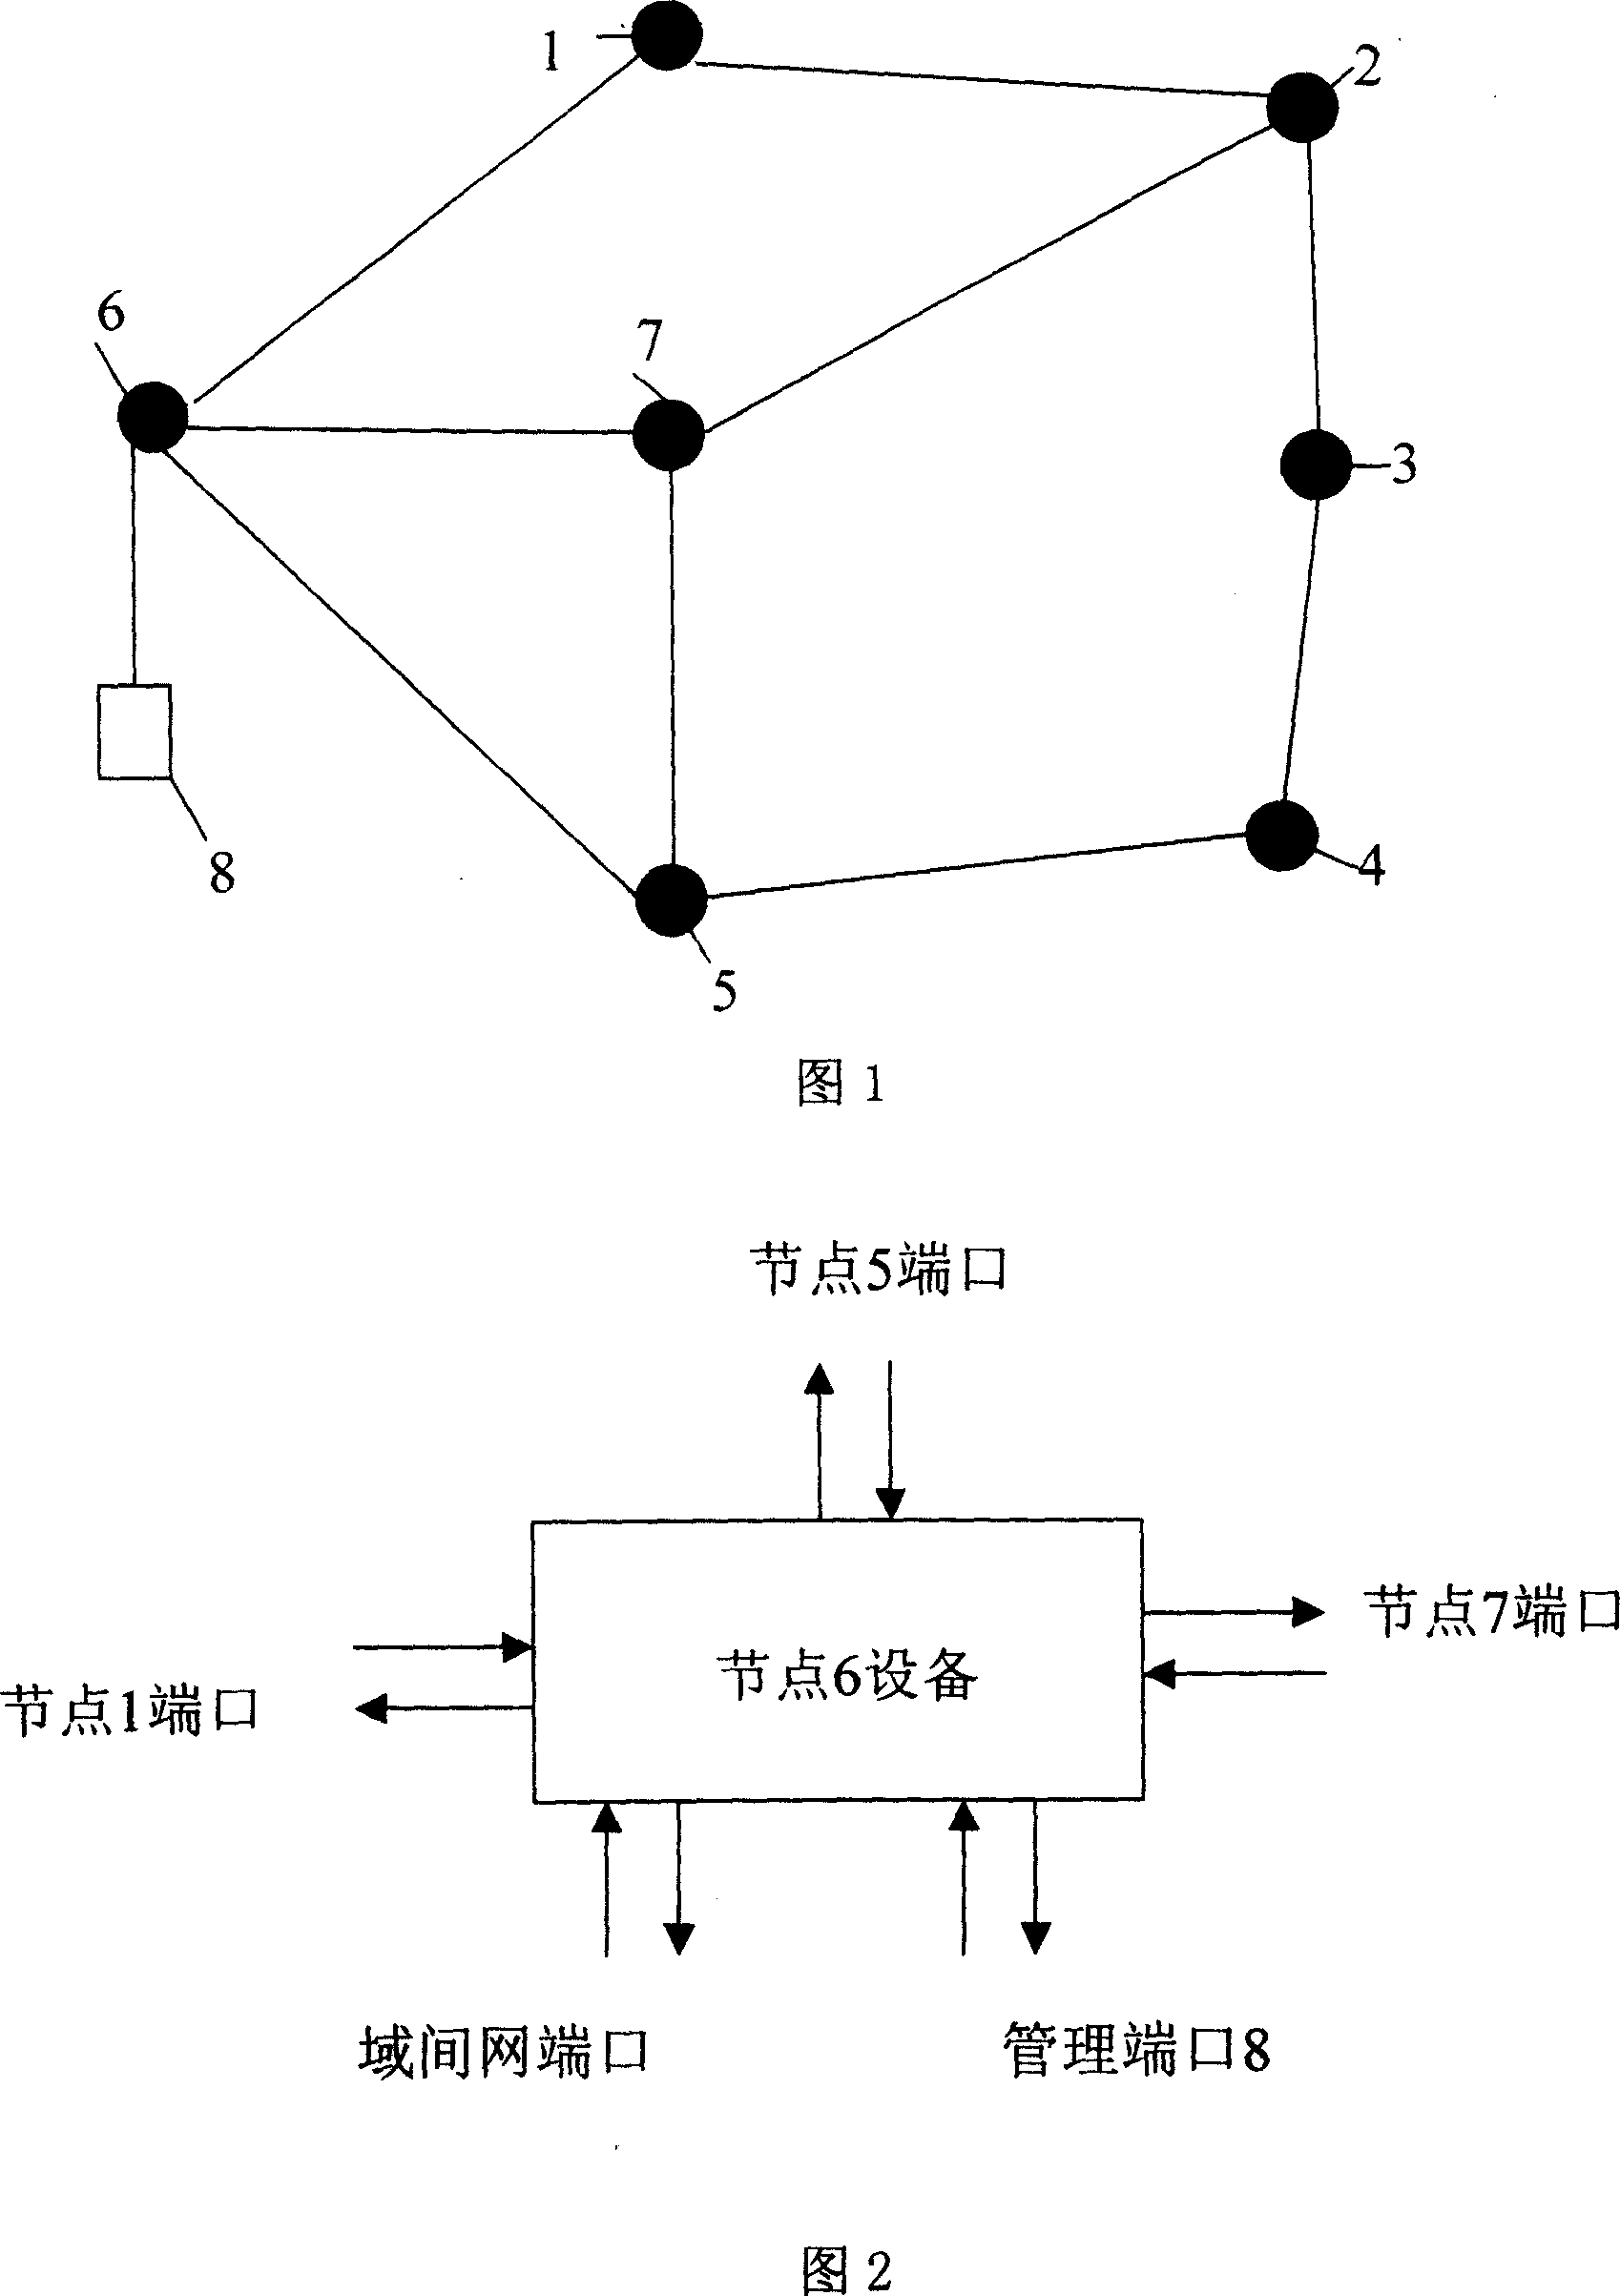 A networking method for semi-network configuration of network and its system